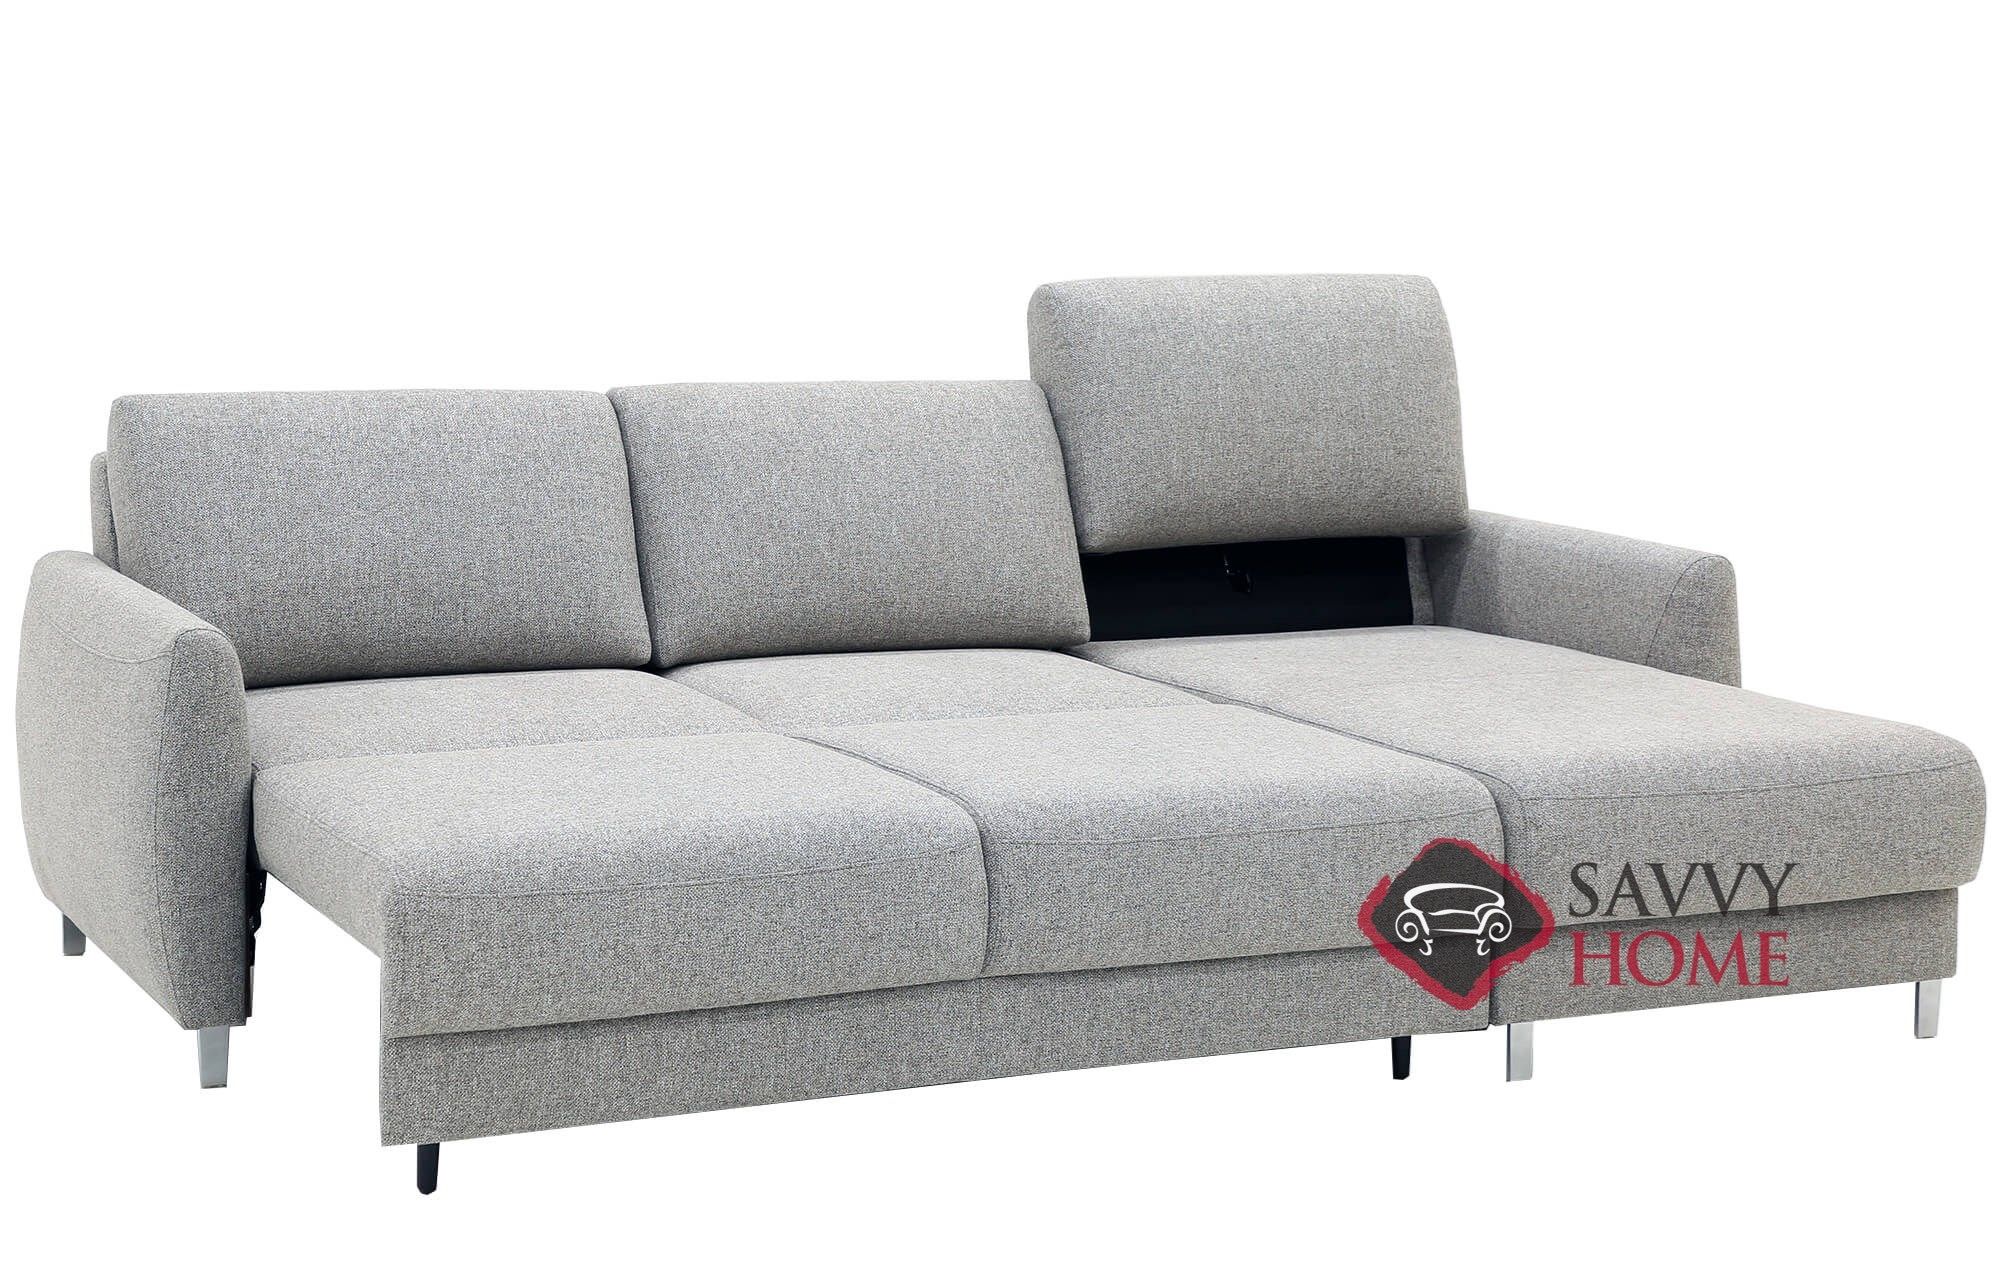 Quick Ship Delta Fabric Sleeper Sofas Chaise Sectional Inluonto With  Fast Shipping | Savvyhomestore Throughout Convertible Sofa With Matching Chaise (View 19 of 20)